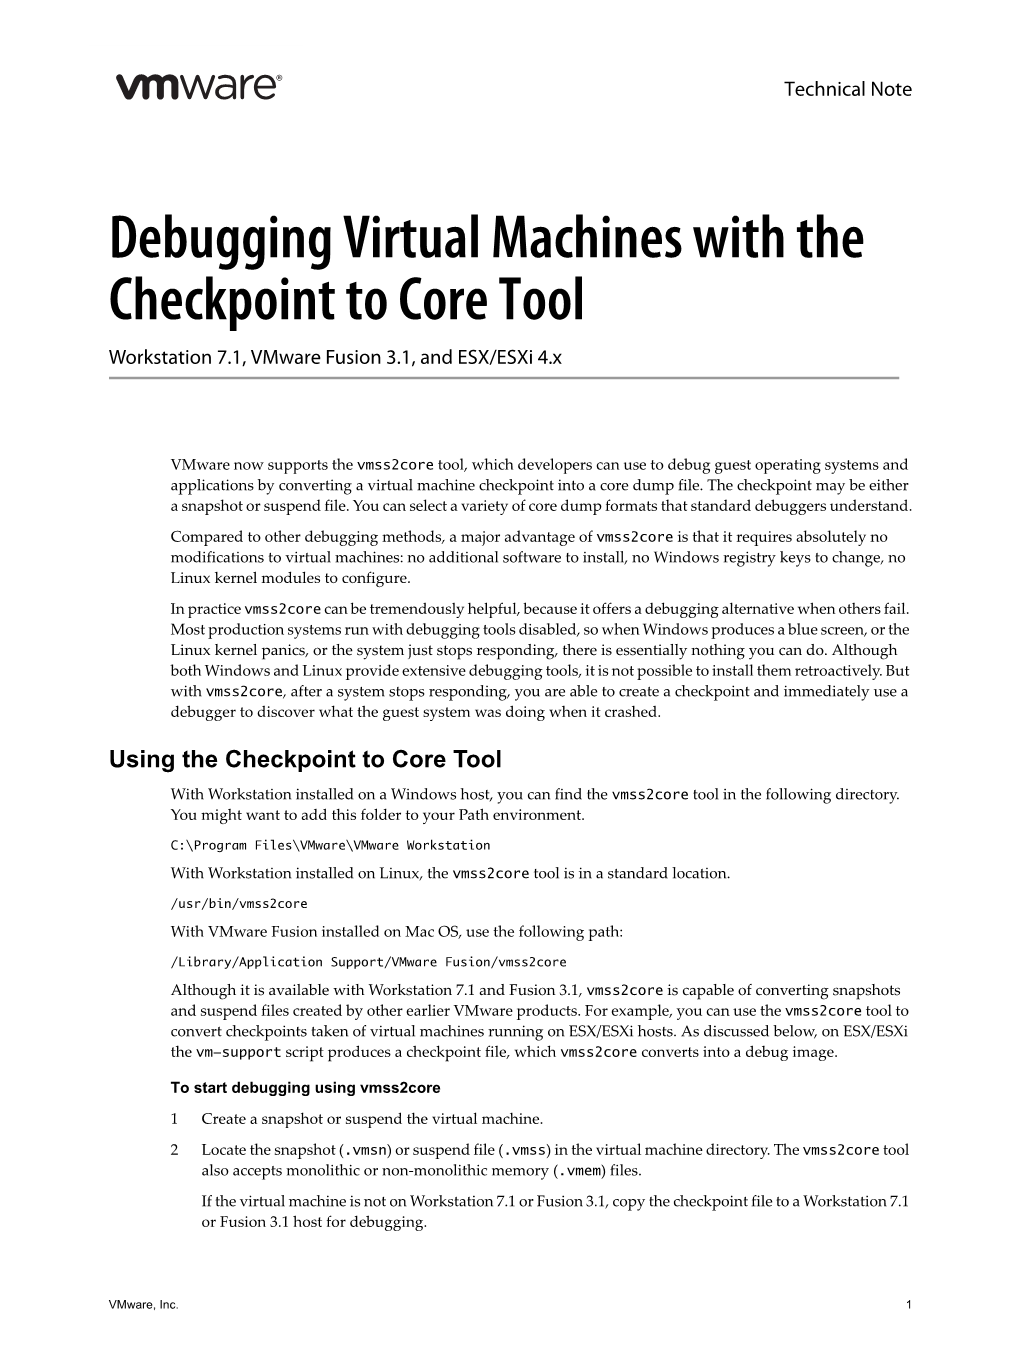 Debugging Virtual Machines with the Checkpoint to Core Tool Workstation 7.1, Vmware Fusion 3.1, and ESX/Esxi 4.X